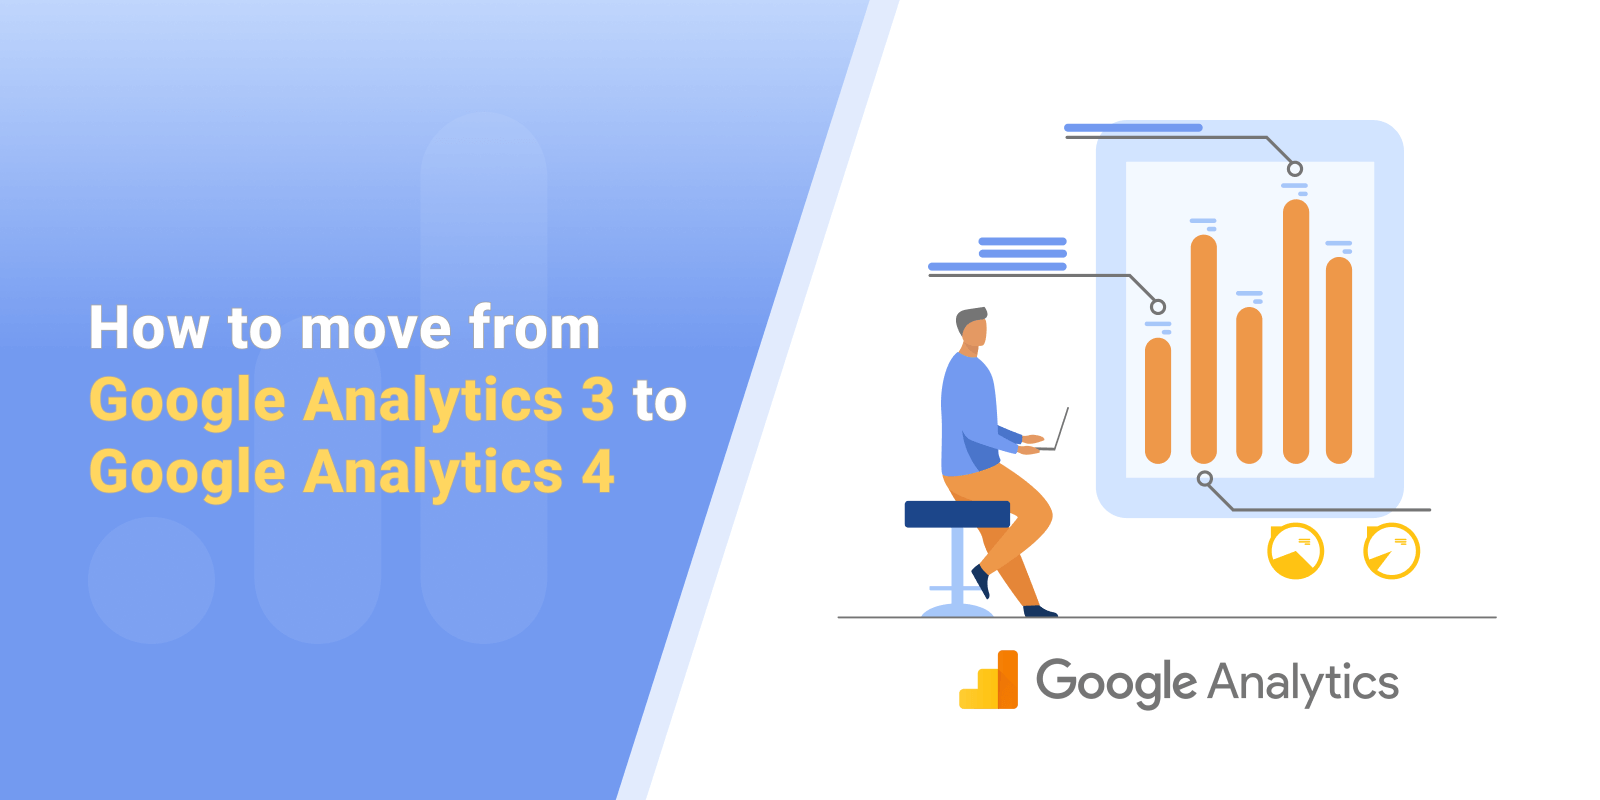 How to move from Google Analytics 3 to GA4